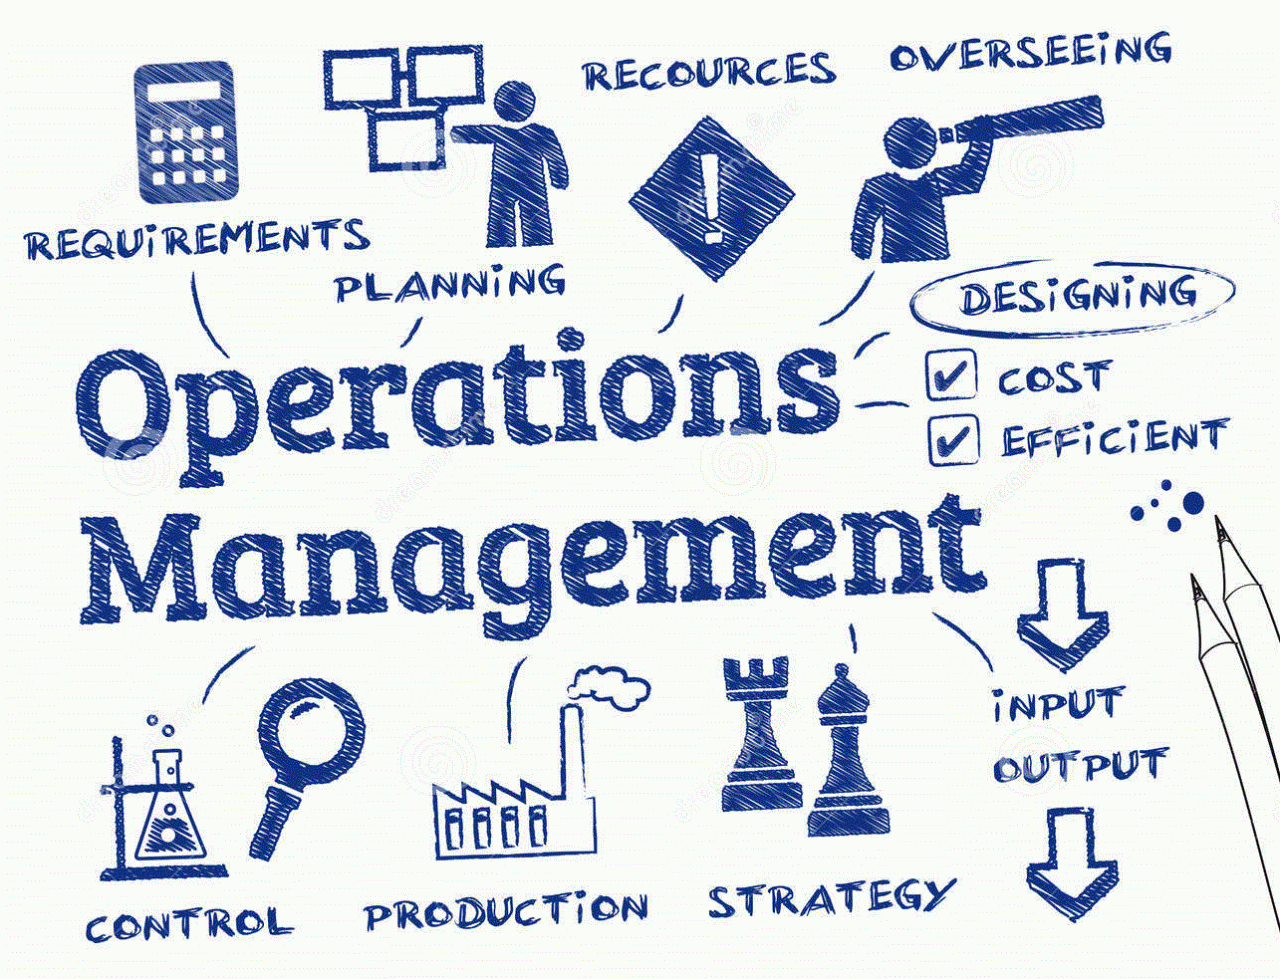 Function of an operations manager